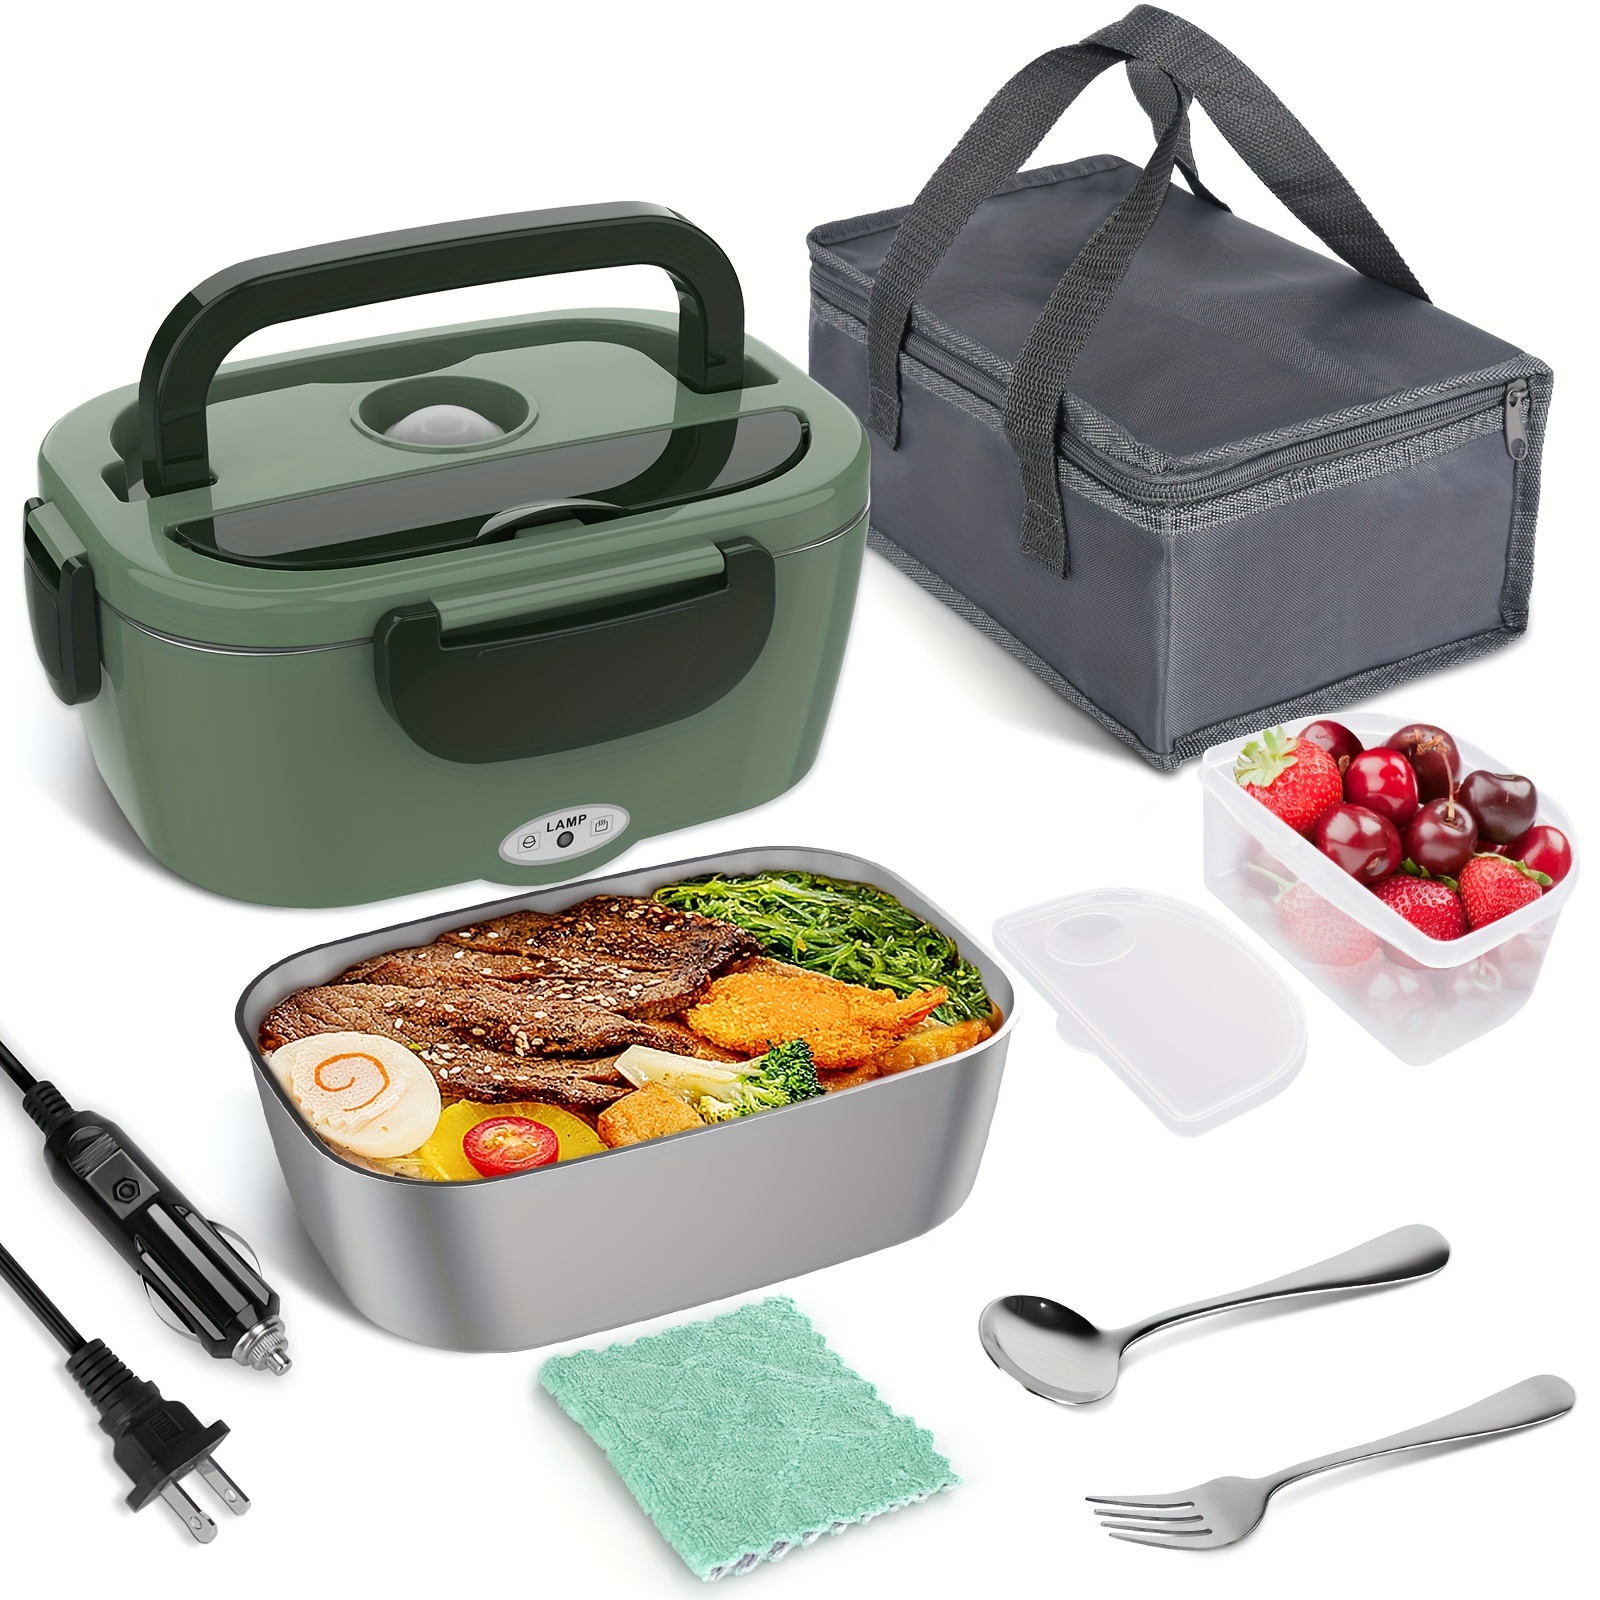 3 in 1 Electric Lunch Box Food Heater 12/110V Portable Lunch Warmer  Upgraded Leakproof Heated Lunch Box for Car/Truck/Office with SS fork &  Spoon and Insulated Carry Bag